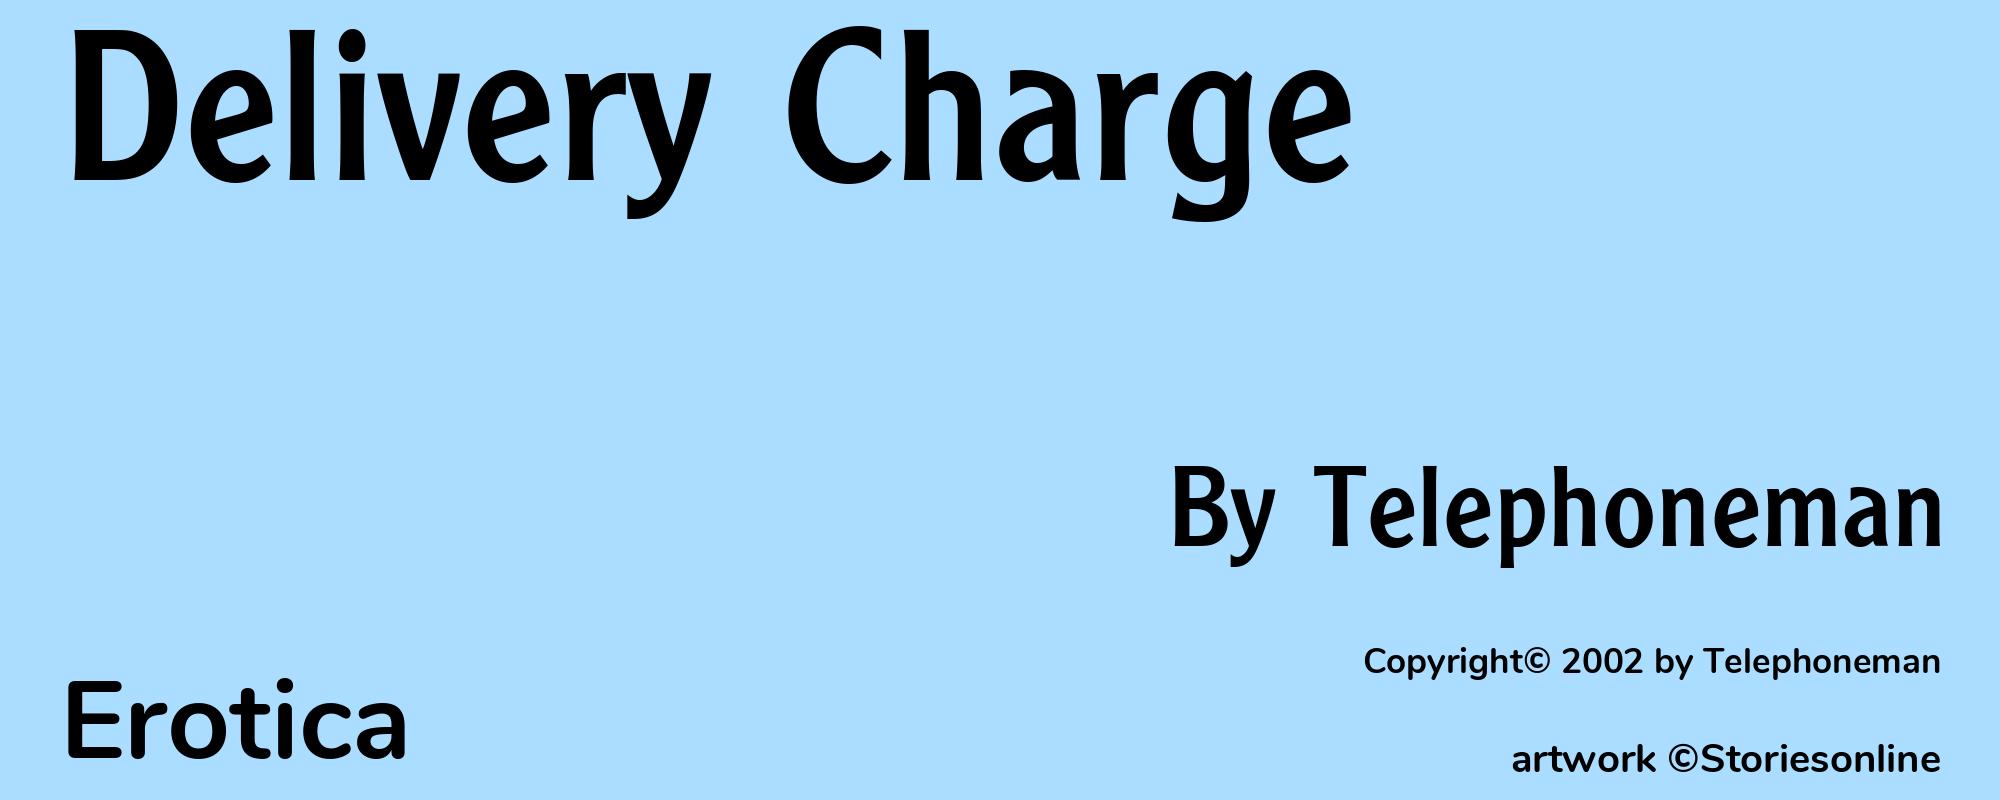 Delivery Charge - Cover